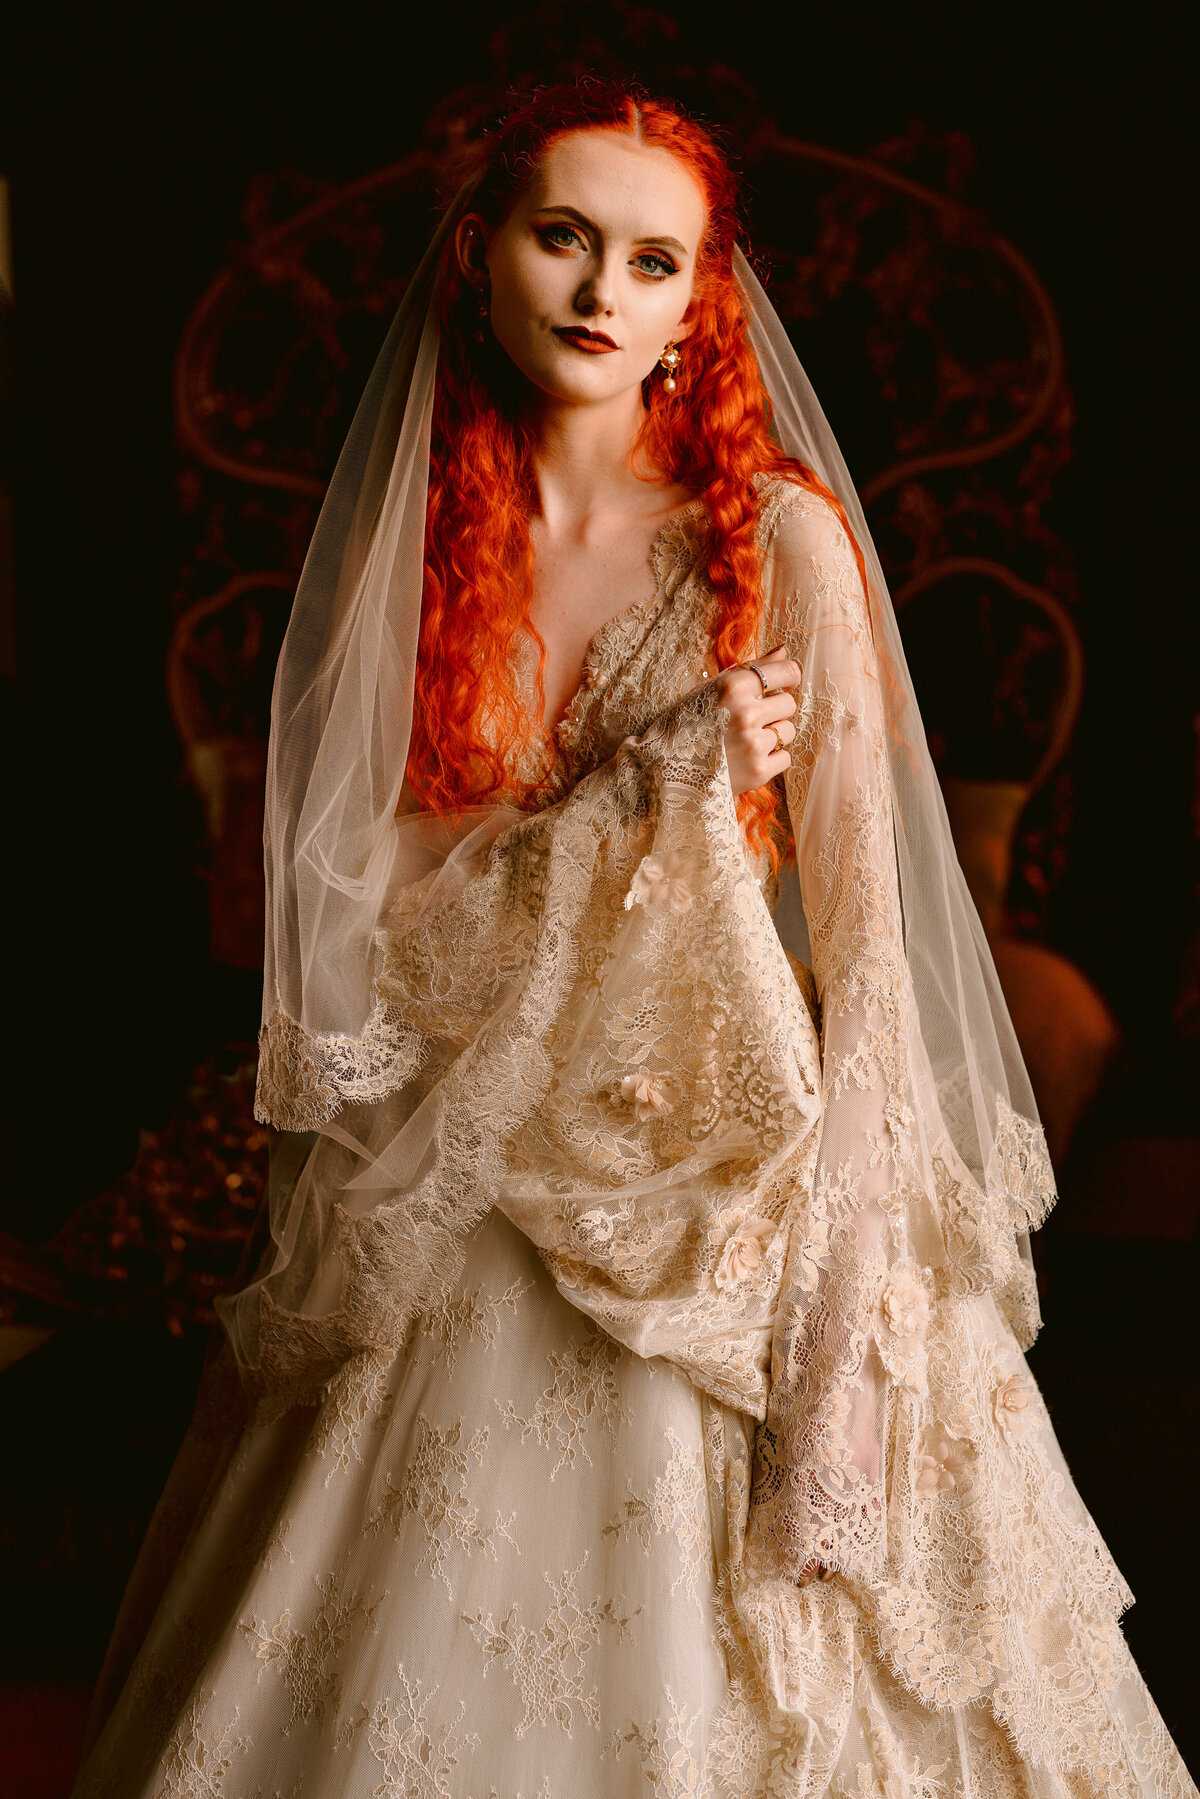 alternative bride with red hair looking into camera